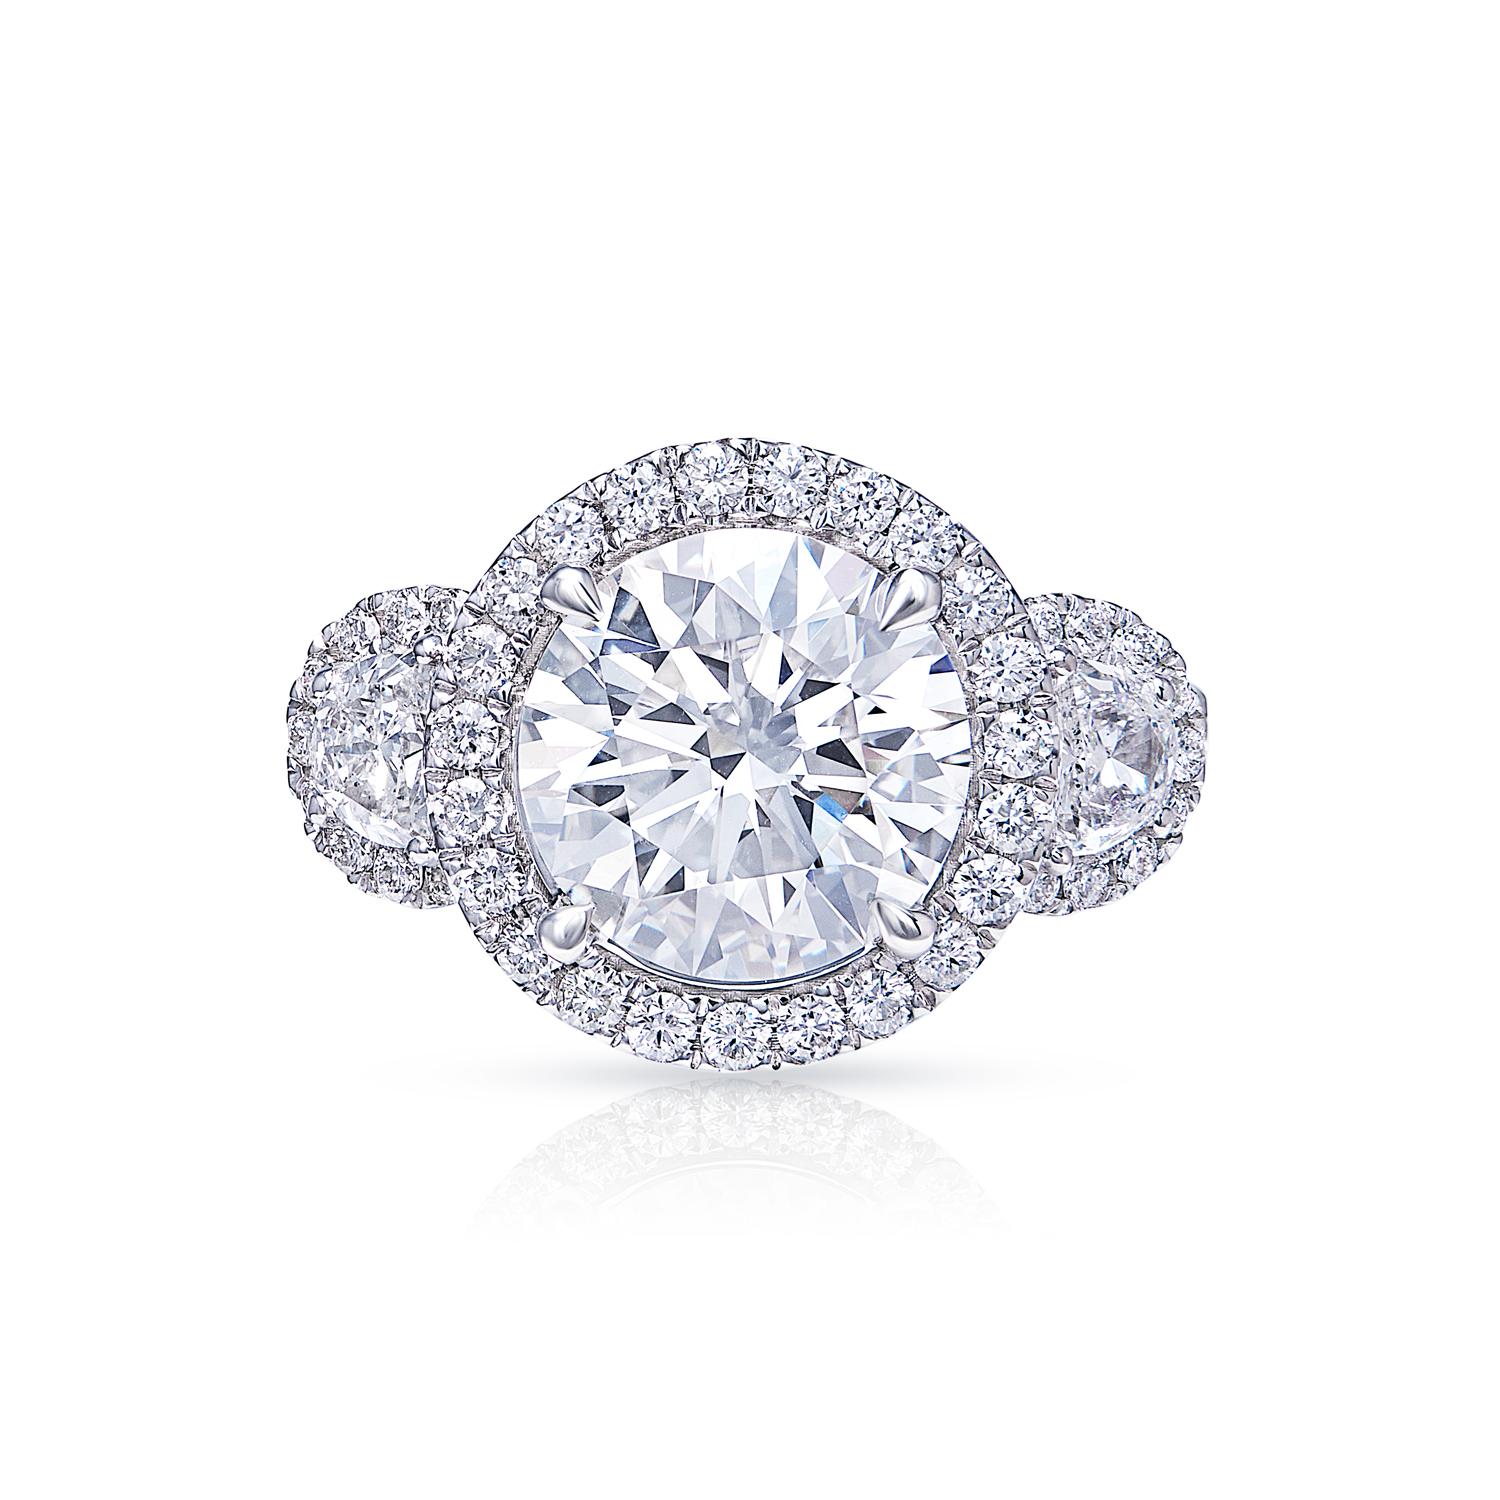 If you're looking for a diamond ring that is sure to impress, then look no further than this GIA-certified round brilliant diamond ring. The perfect symbol of your love and commitment, this ring features a stunning round diamond that has been